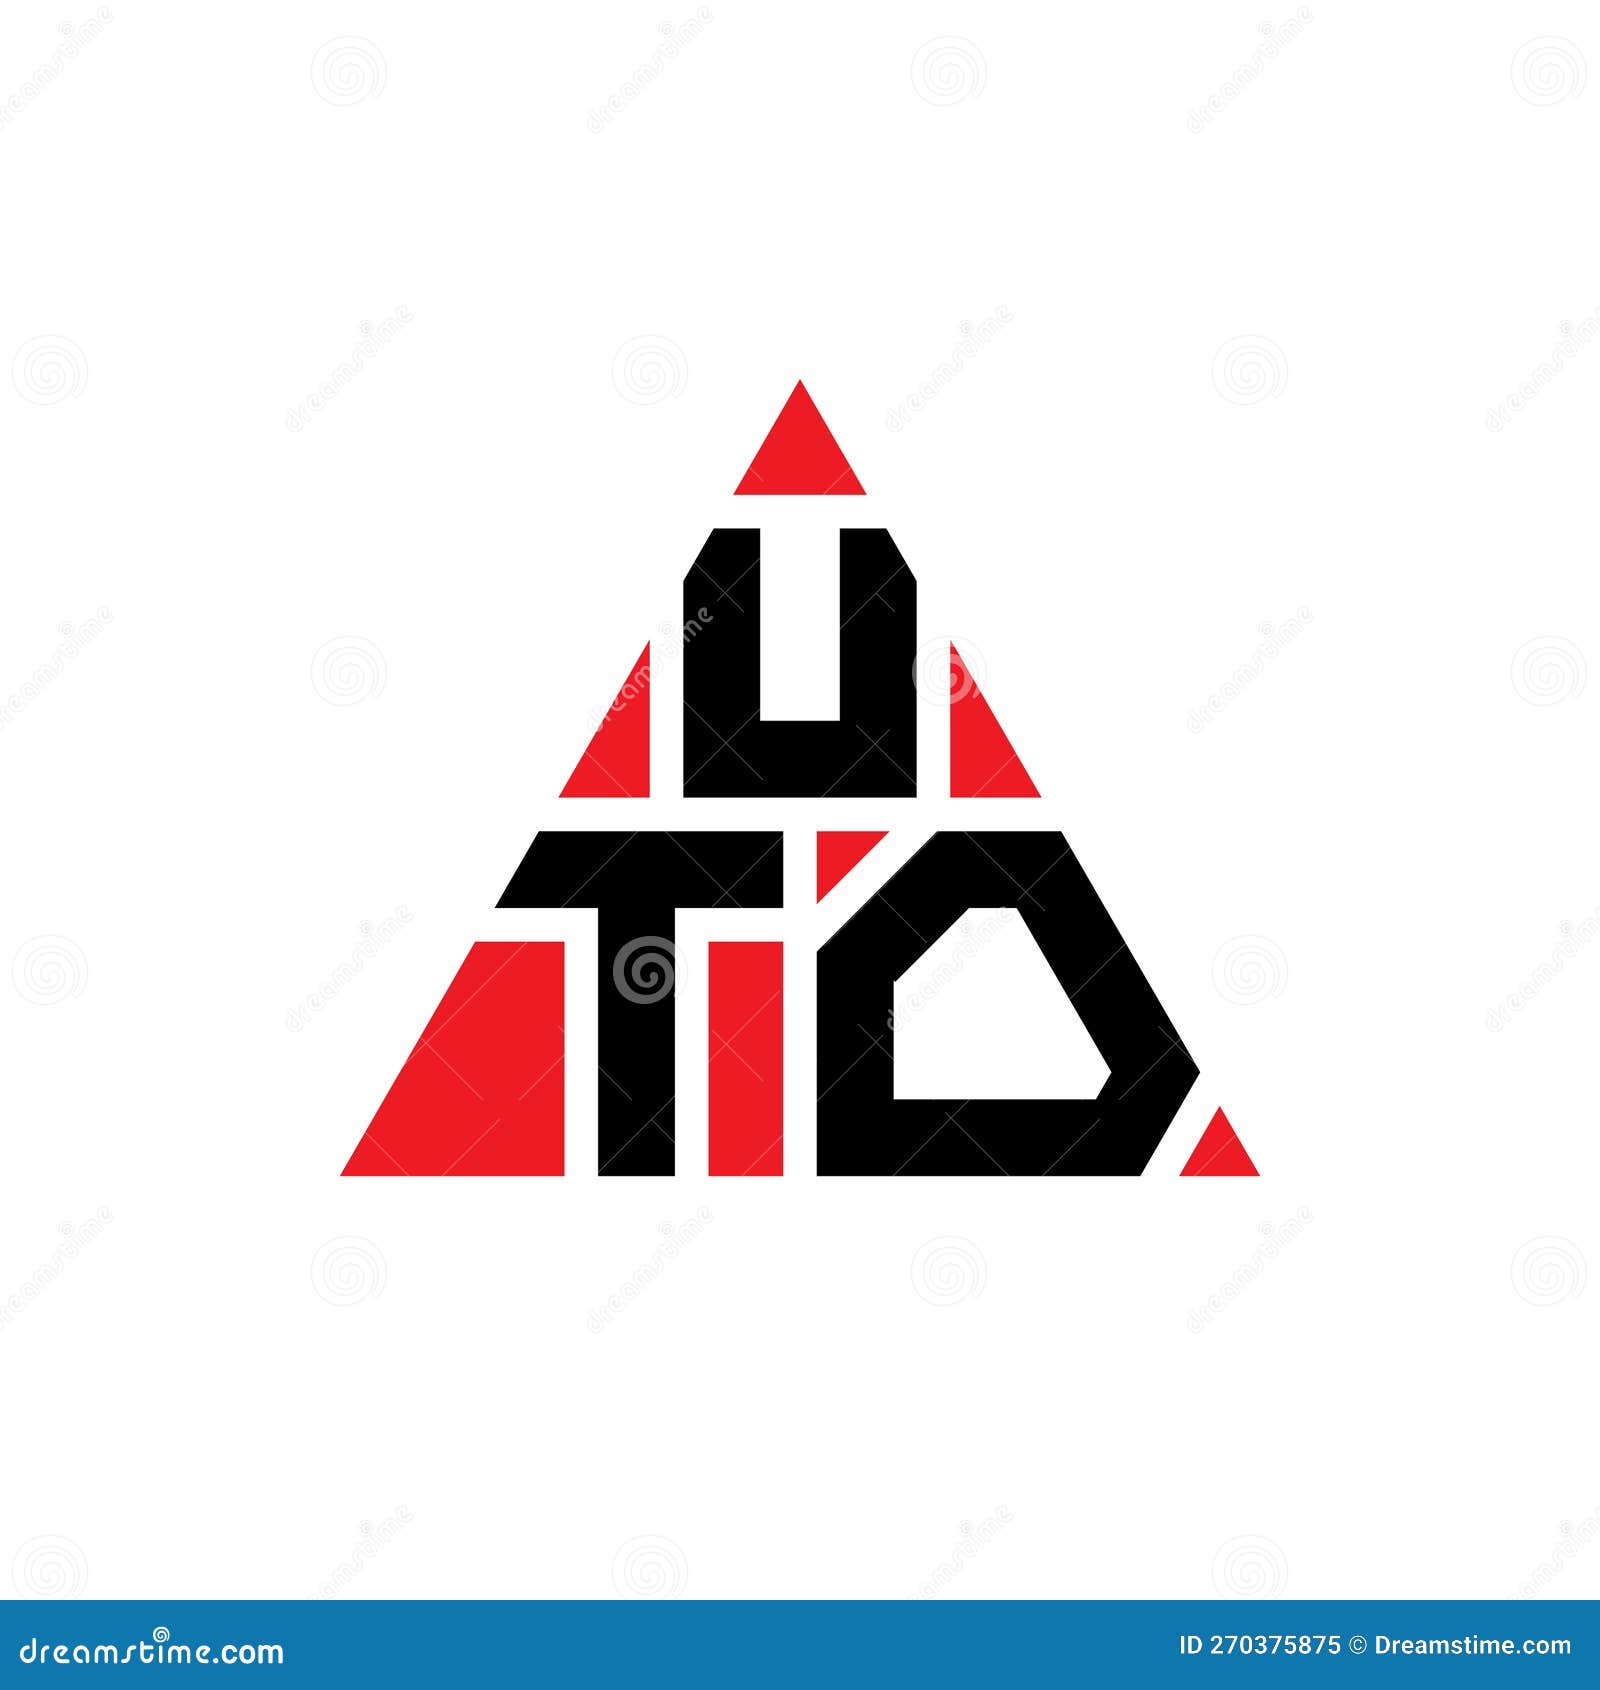 uto triangle letter logo  with triangle . uto triangle logo  monogram. uto triangle  logo template with red